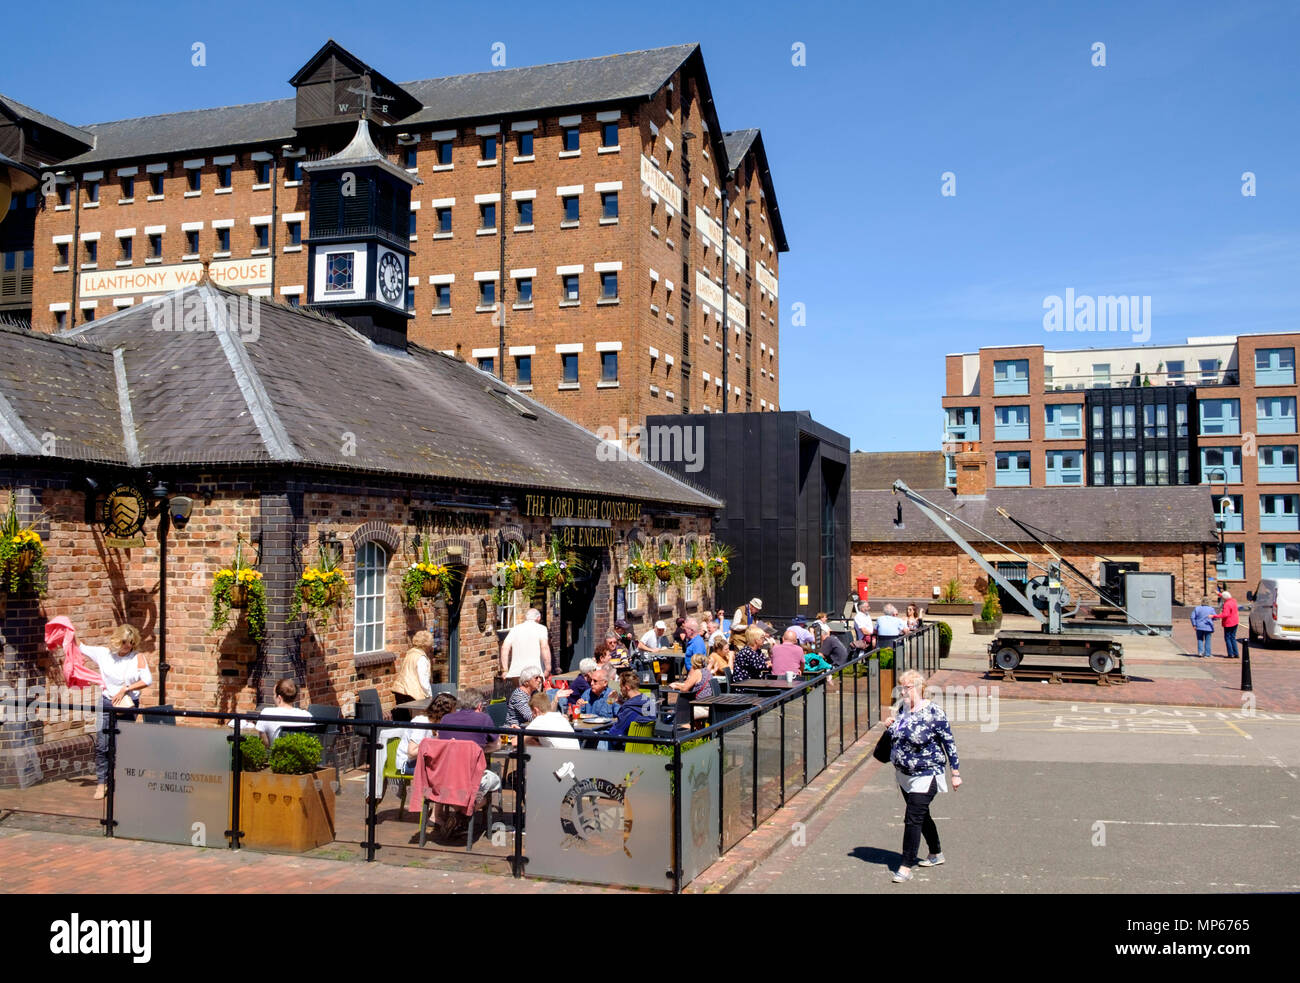 The high constable of england, a wetherspoons pub at the historic docks gloucester,gloucestershire england uk Stock Photo